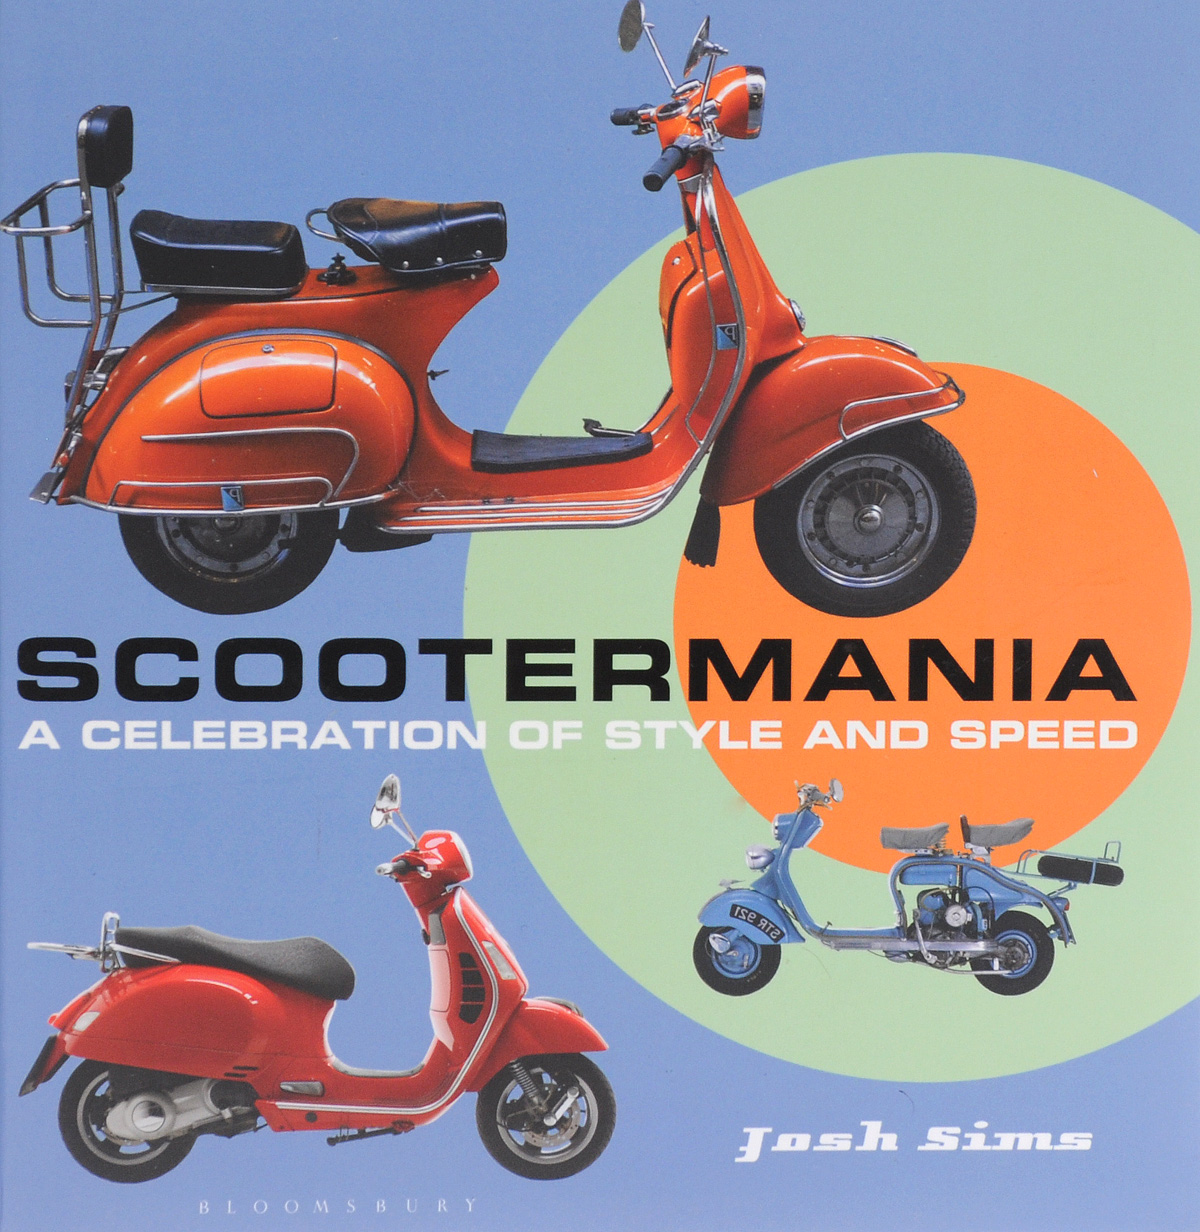 Scootermania: A С elebration of Style and Speed